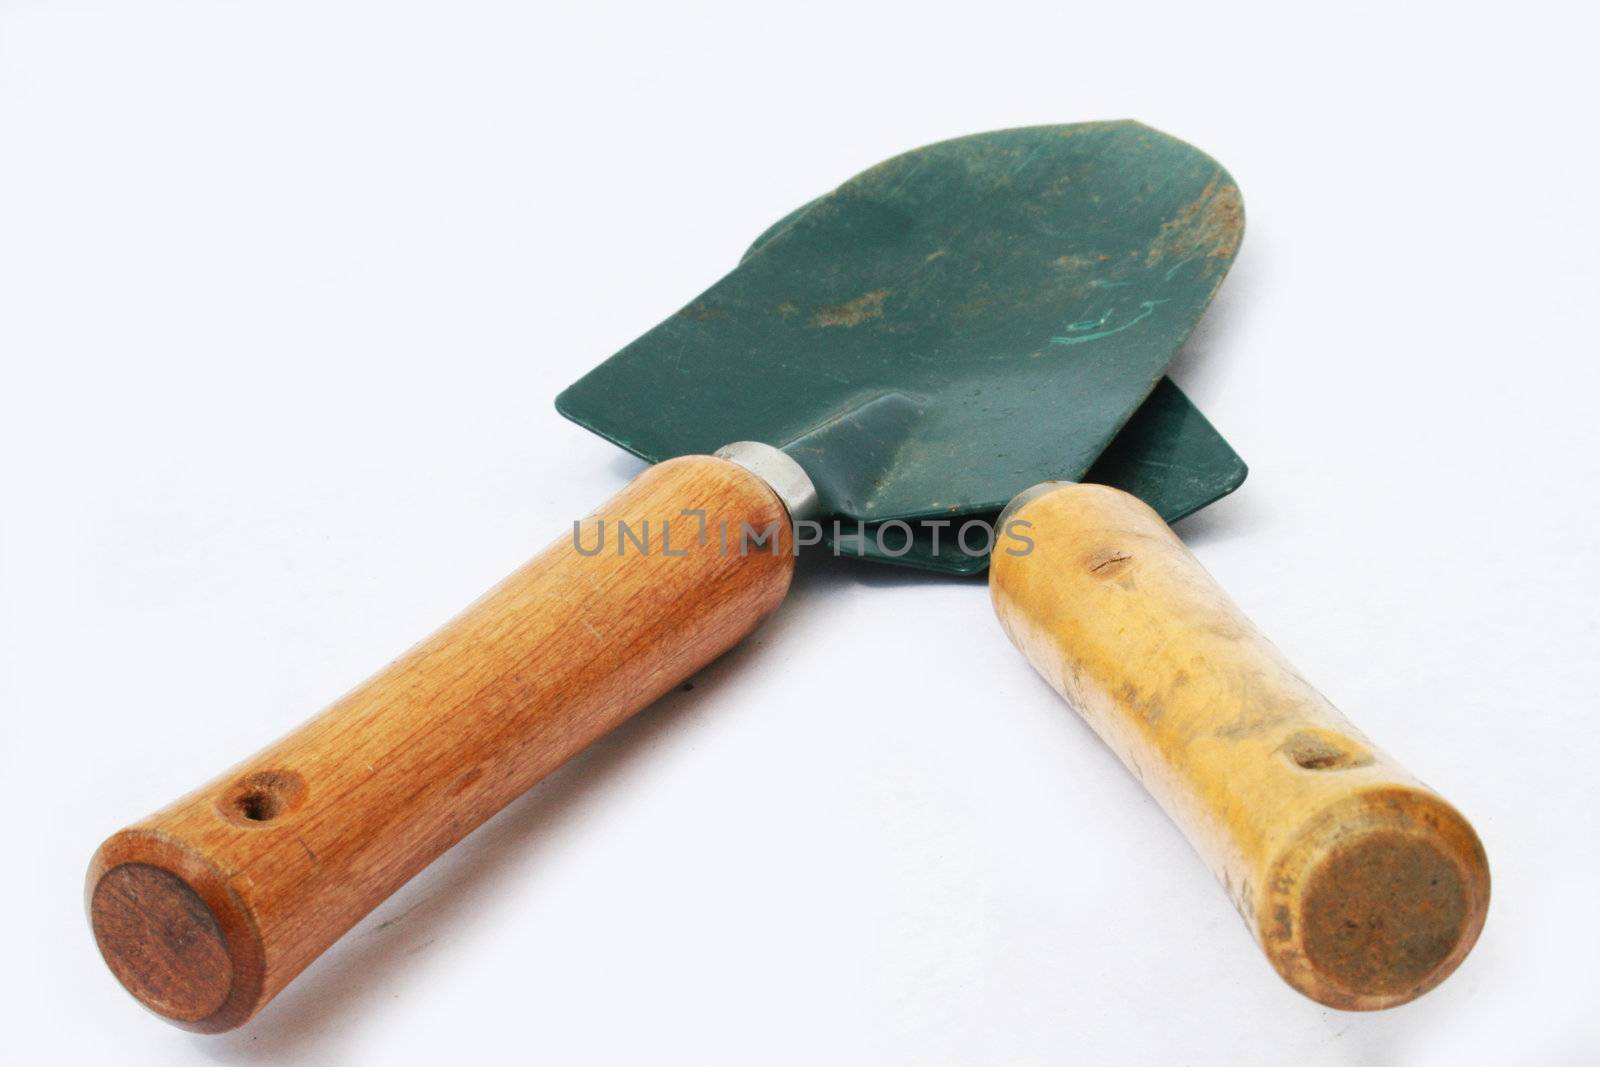 Two garden trowels against white background